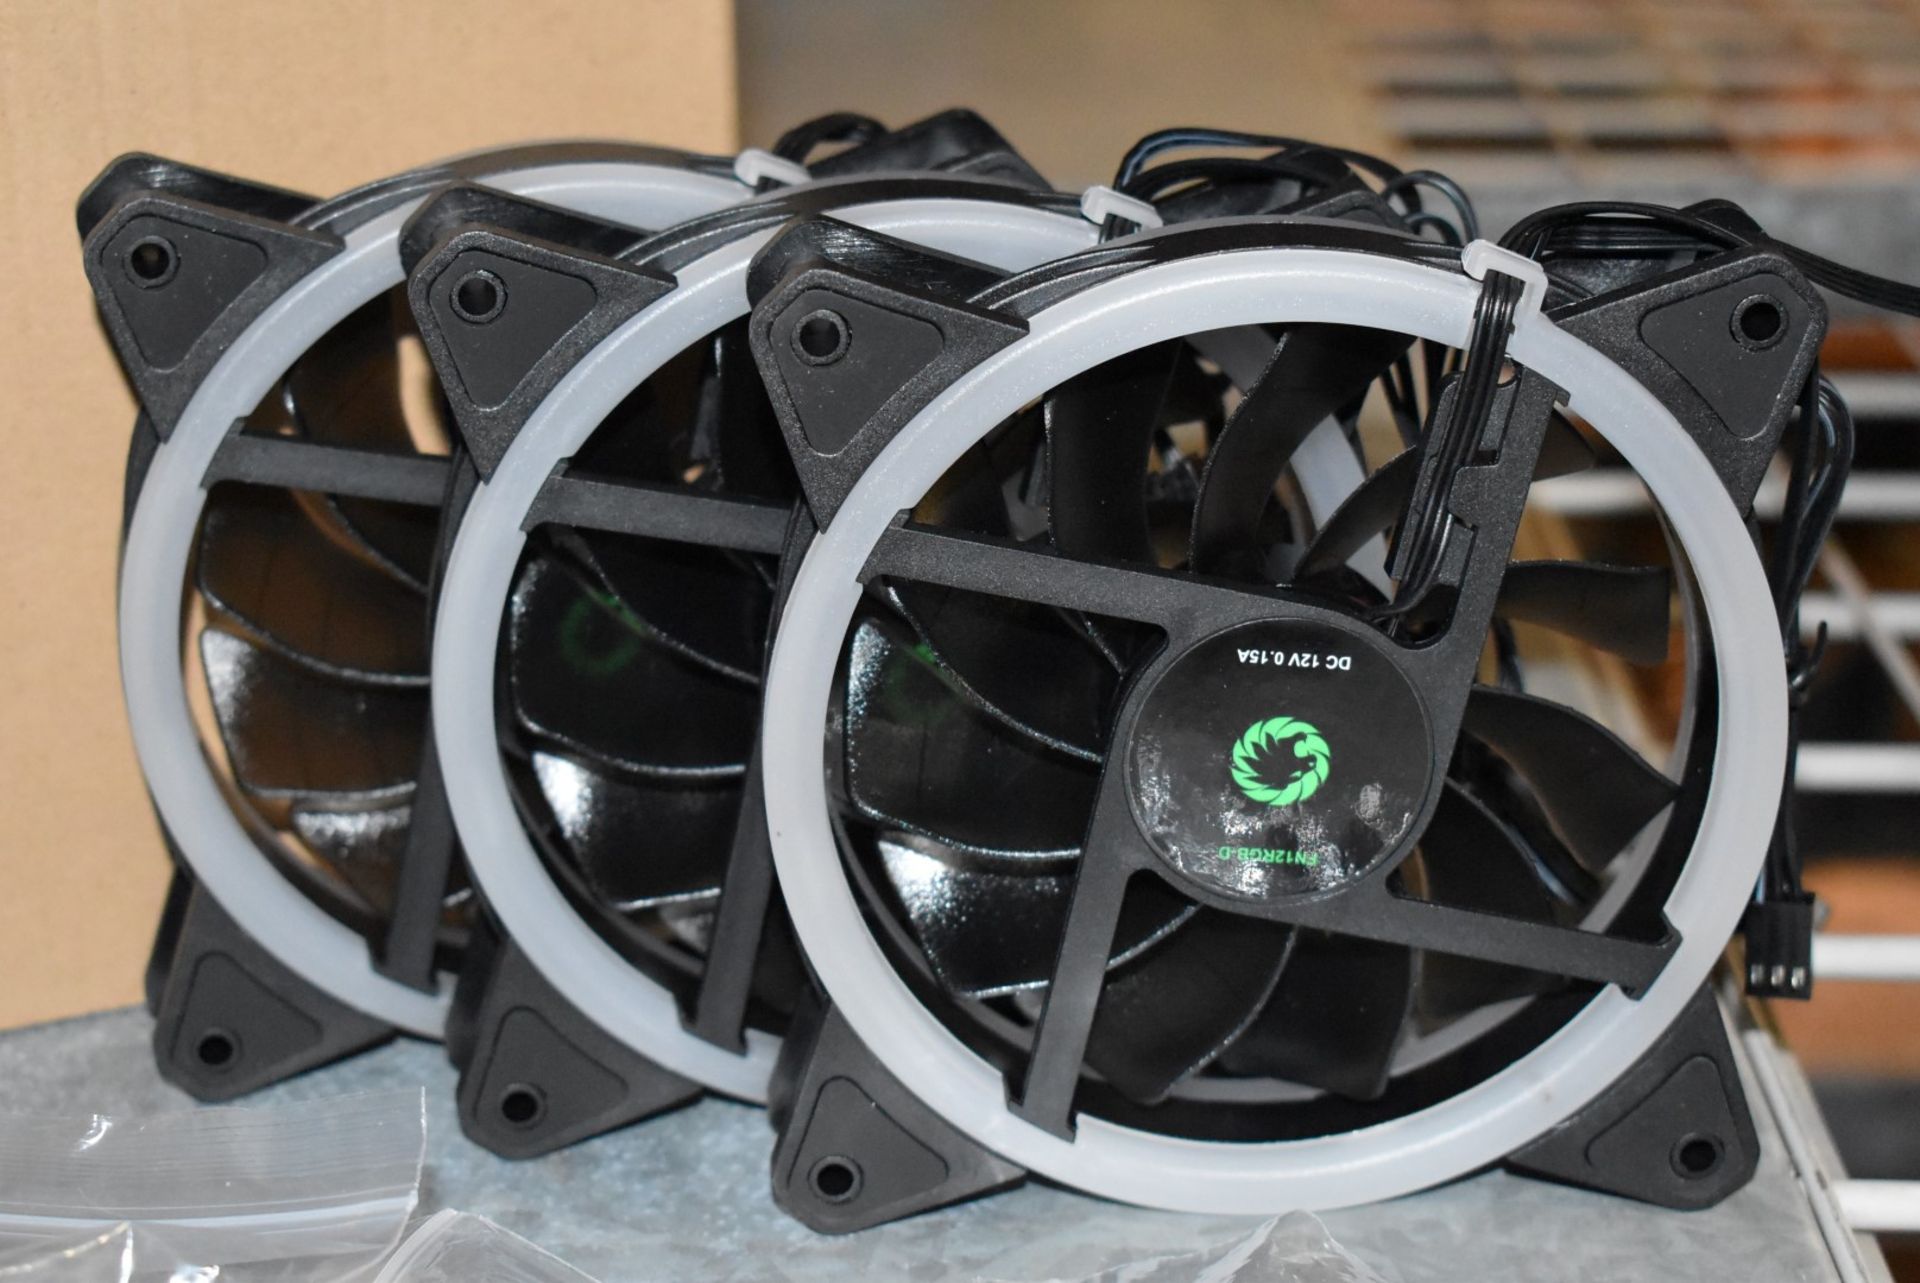 30 x GameMax LED Fan Packs For PC Gaming Cases - Each Packs Include 3 x 120mm LED Case Fans, - Image 2 of 8